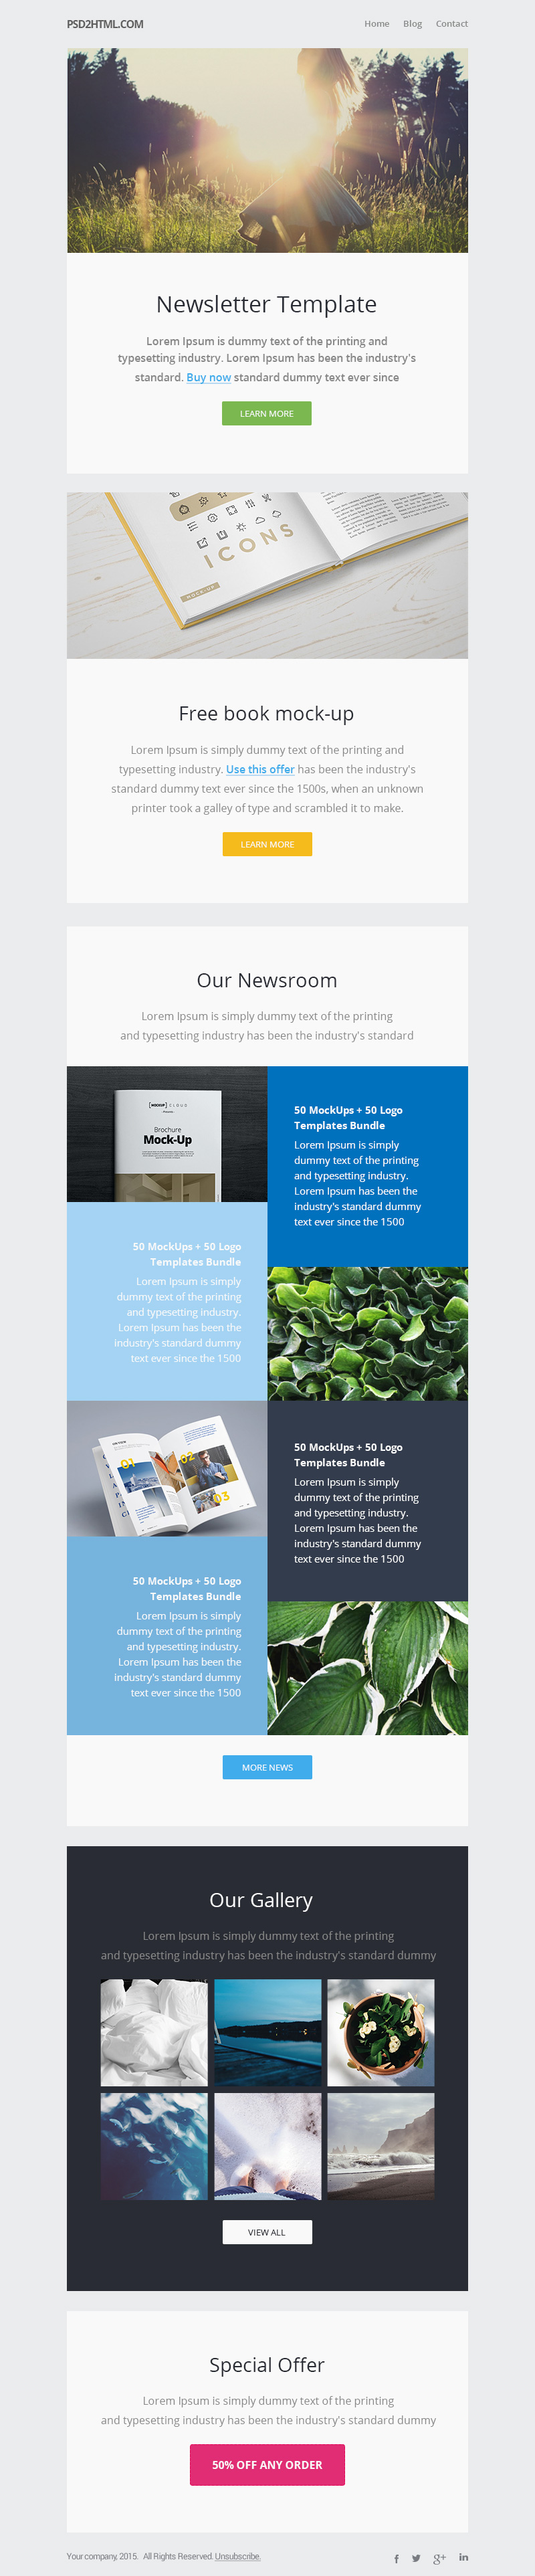 Download Free Newsletter Template (PSD & HTML) - GraphicsFuel